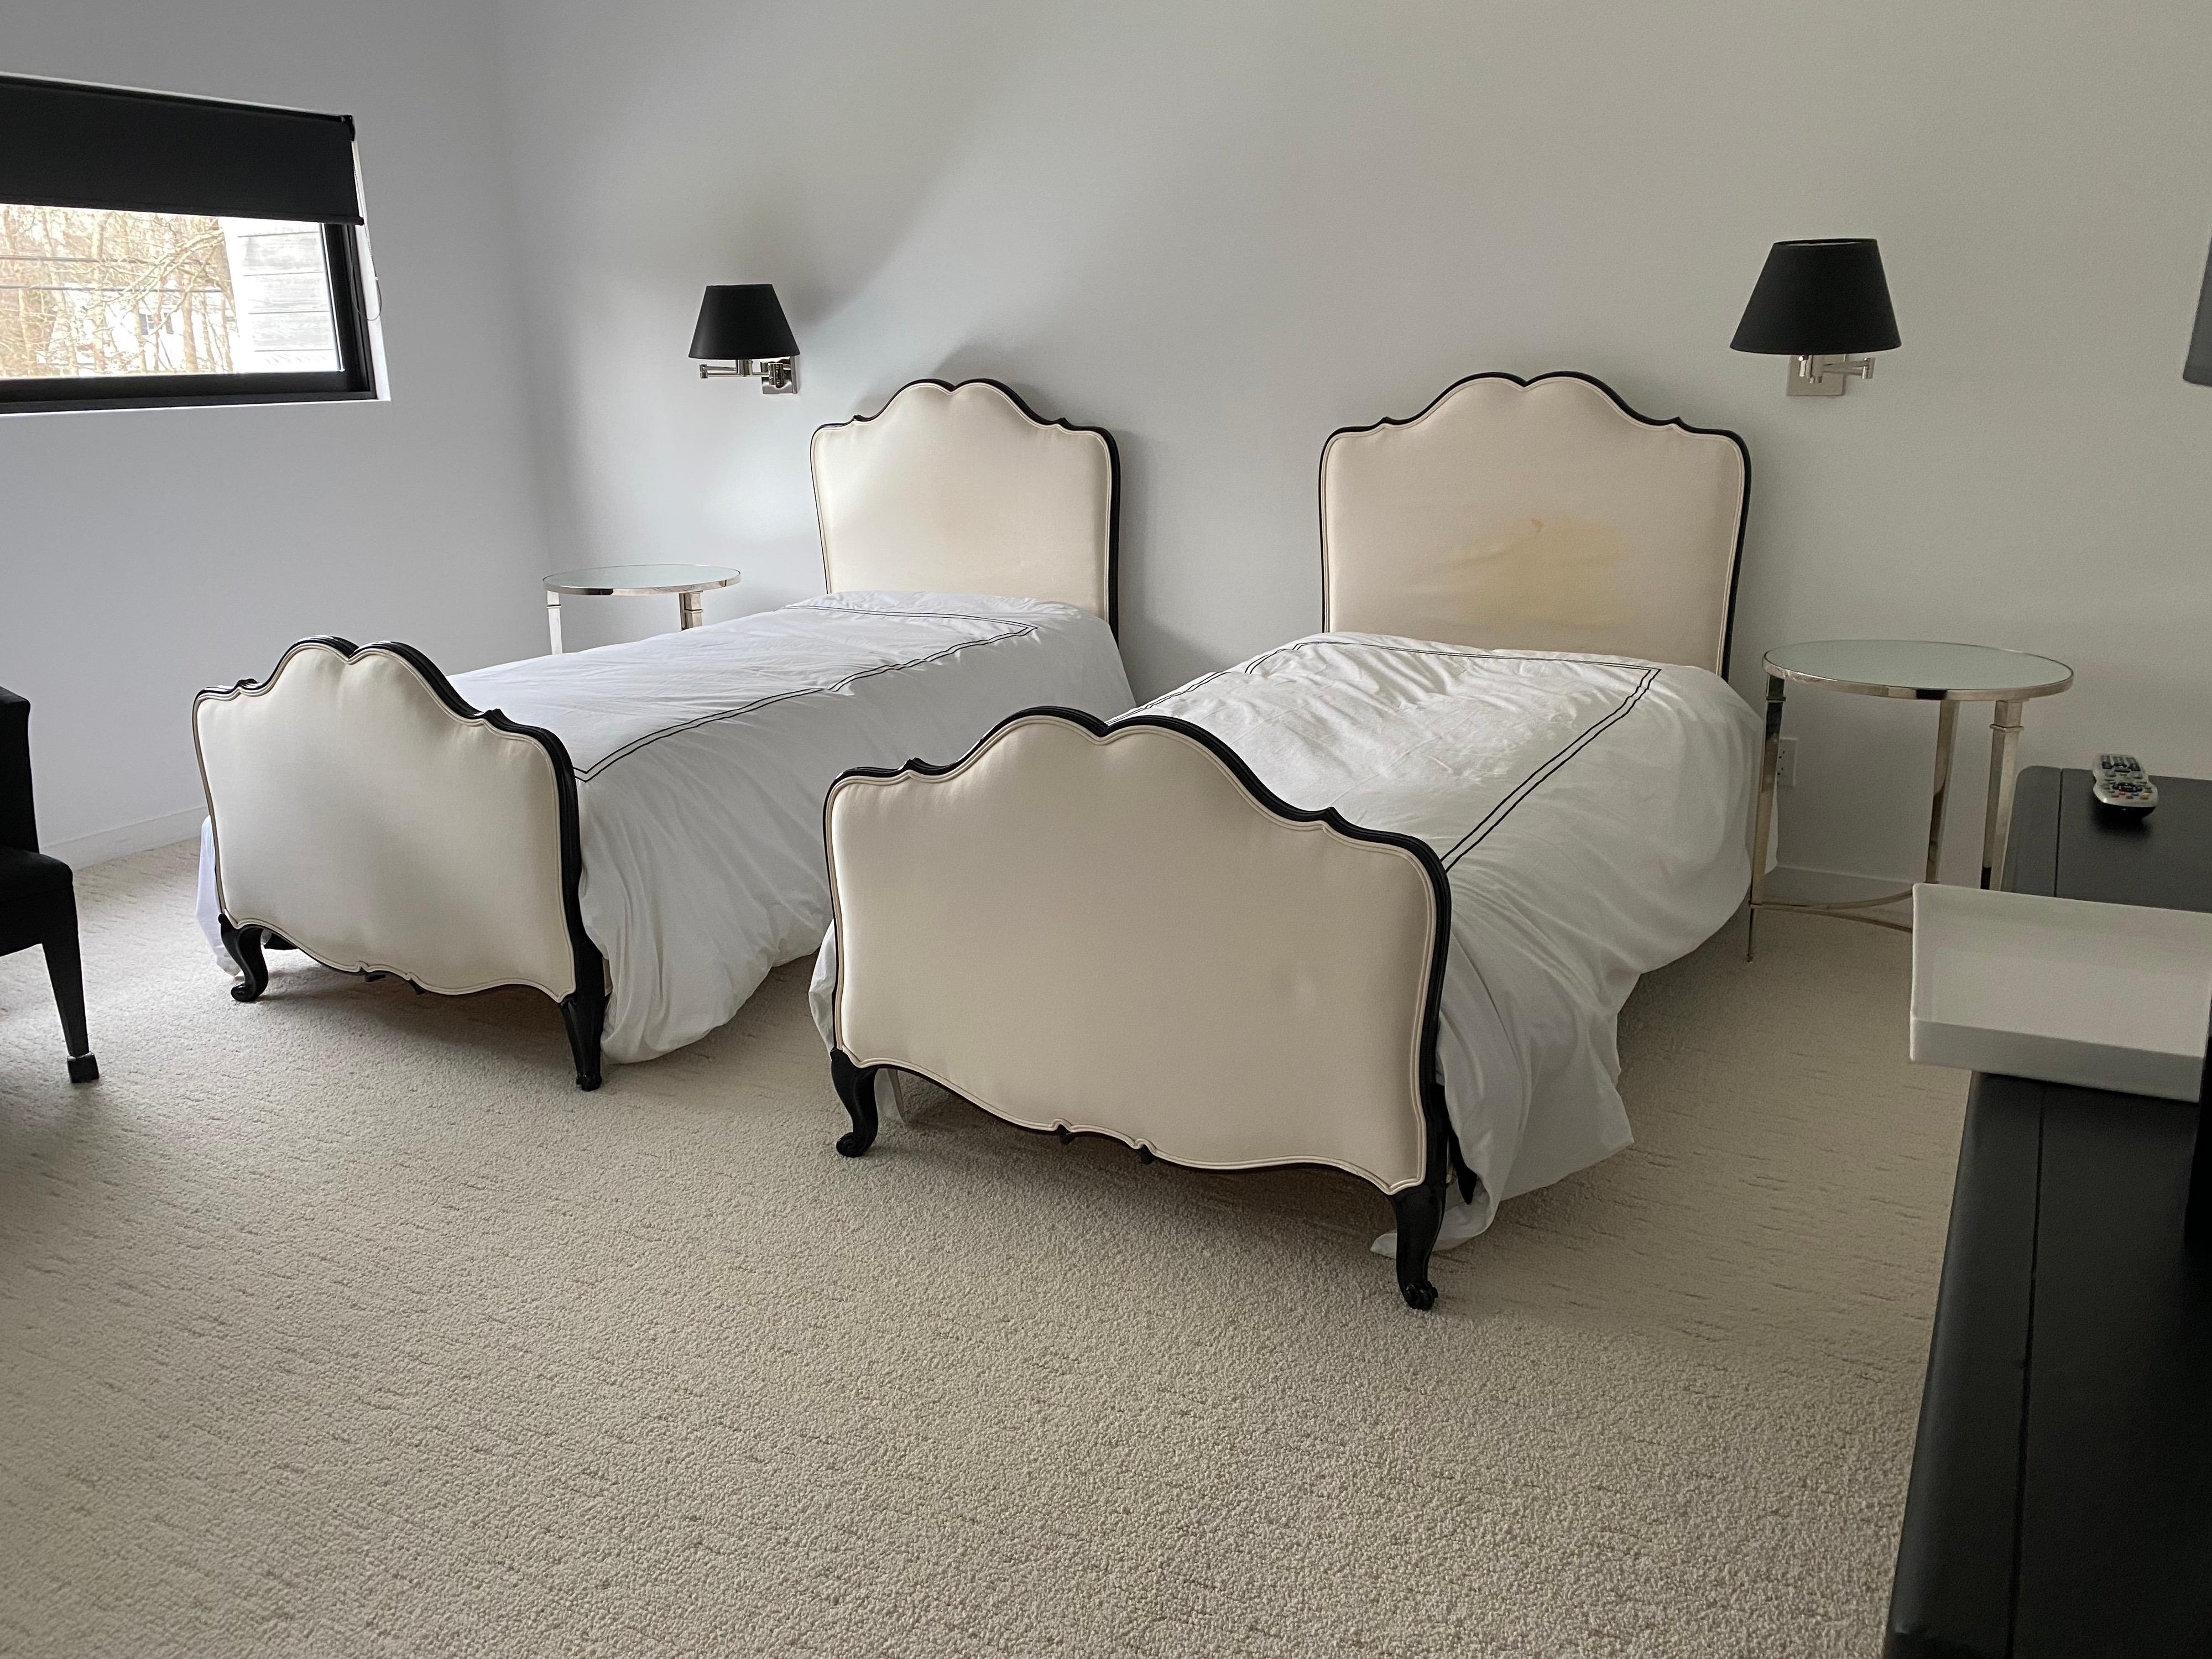 Pair of Black Painted Louis XV Style Upholstered Twin Bed Frames, 20th Century
These pair of twin bed frames create high definition in a bedroom in the black high gloss finish and cream satin upholstery with double self-welting. They have the